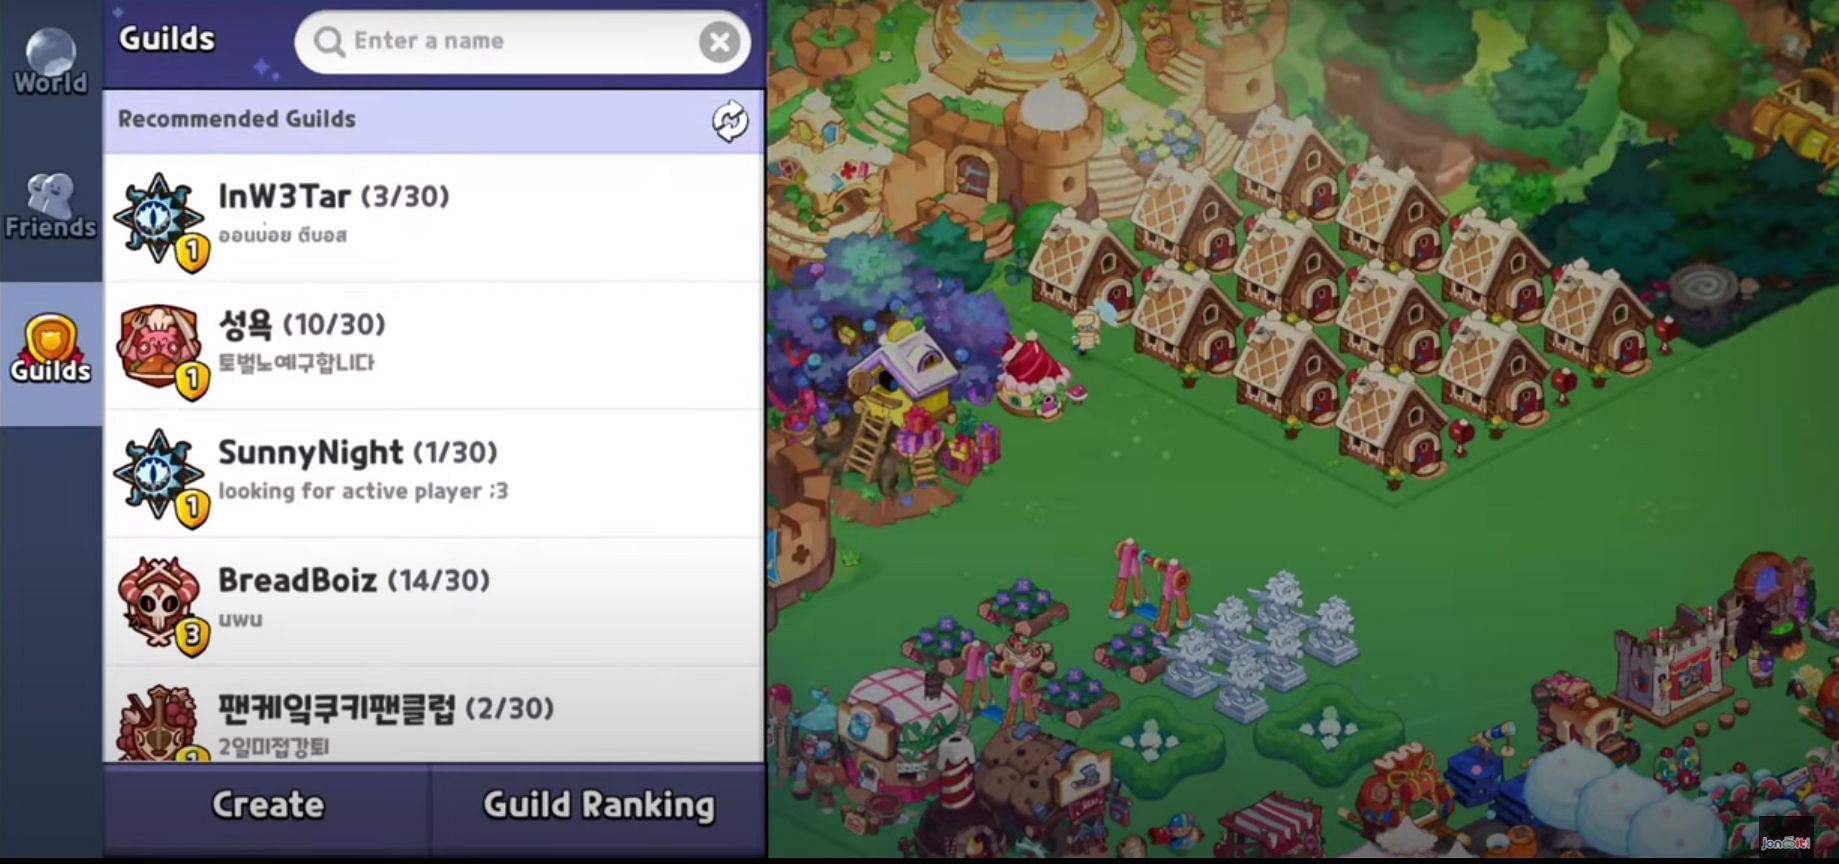 Recommended guilds (Image via YouTube/Jonooit)